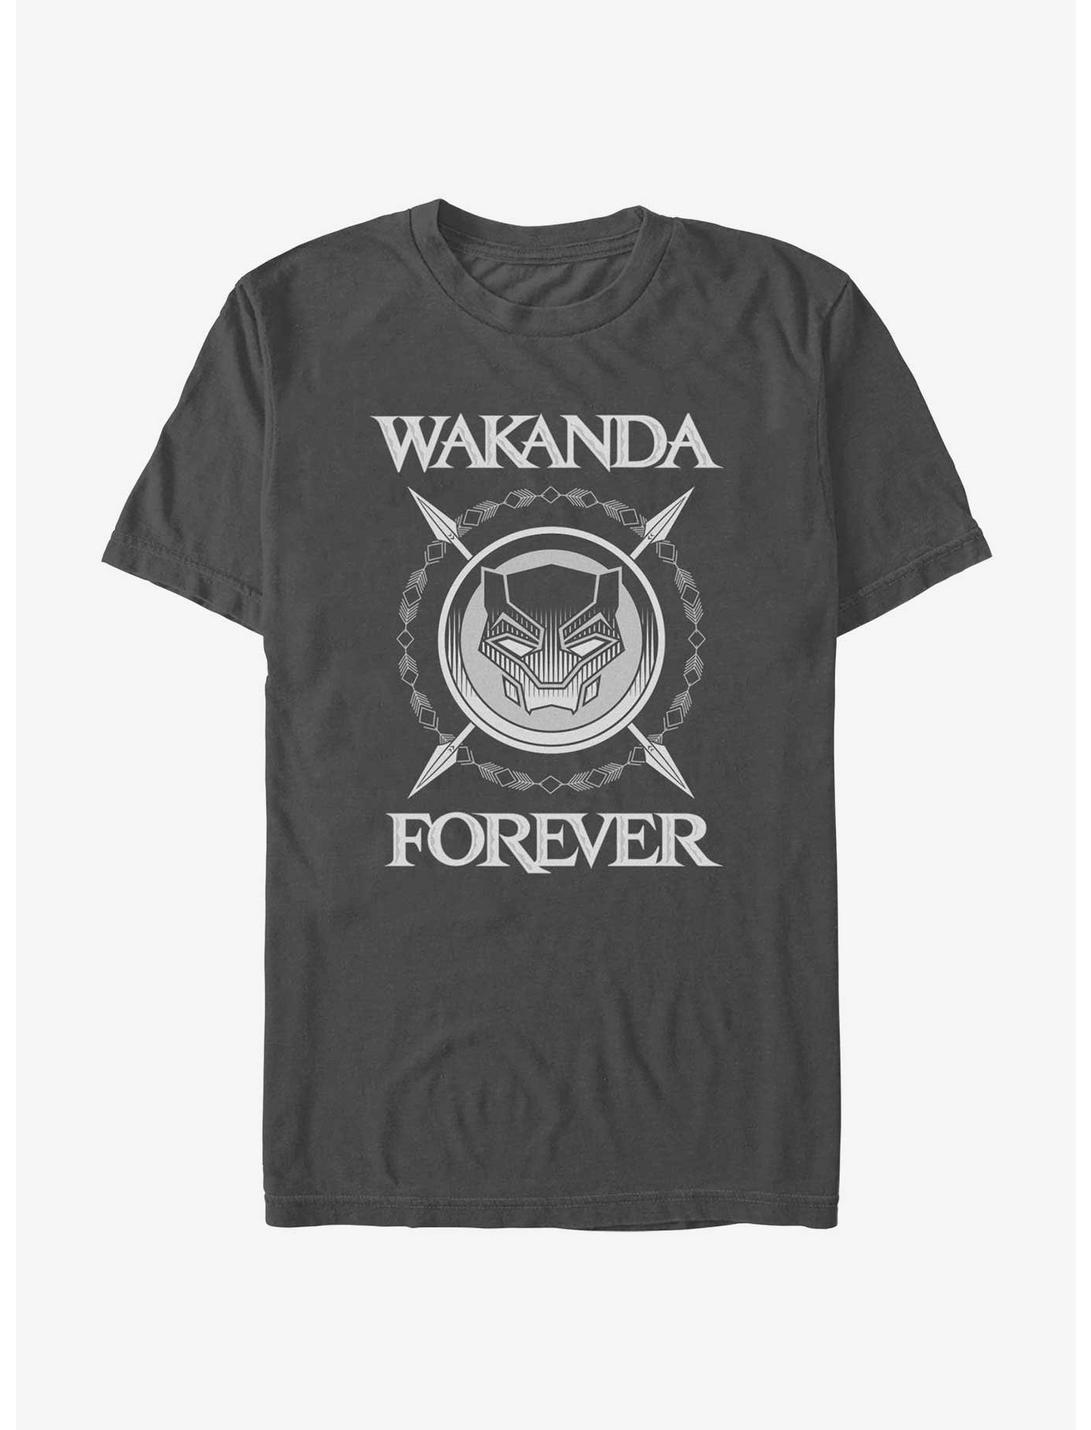 Marvel Black Panther: Wakanda Forever Crossed Spears T-Shirt, CHARCOAL, hi-res